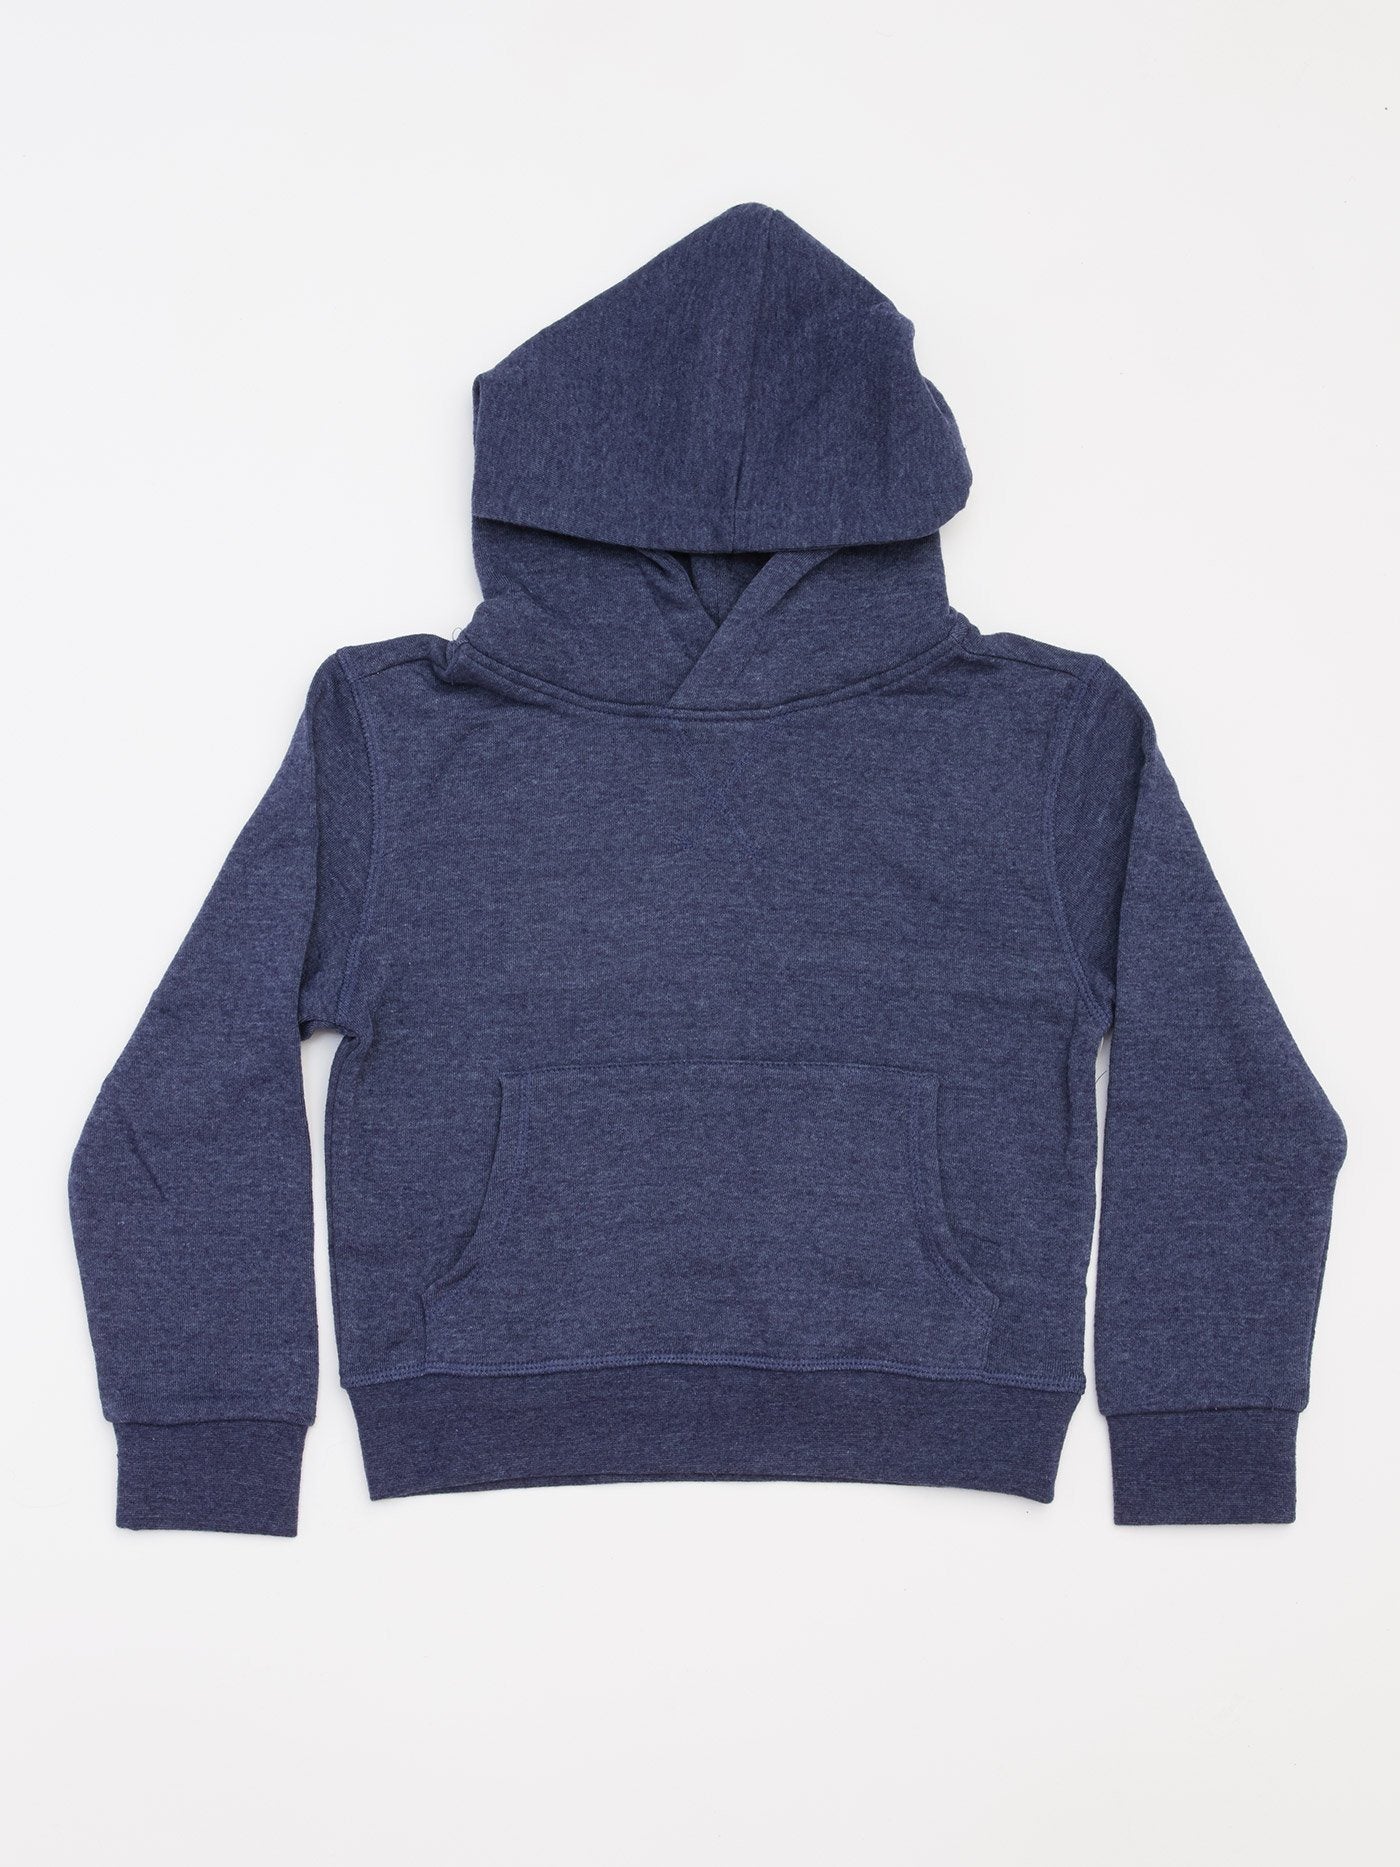 Kid's Hoodies – Threads 4 Thought